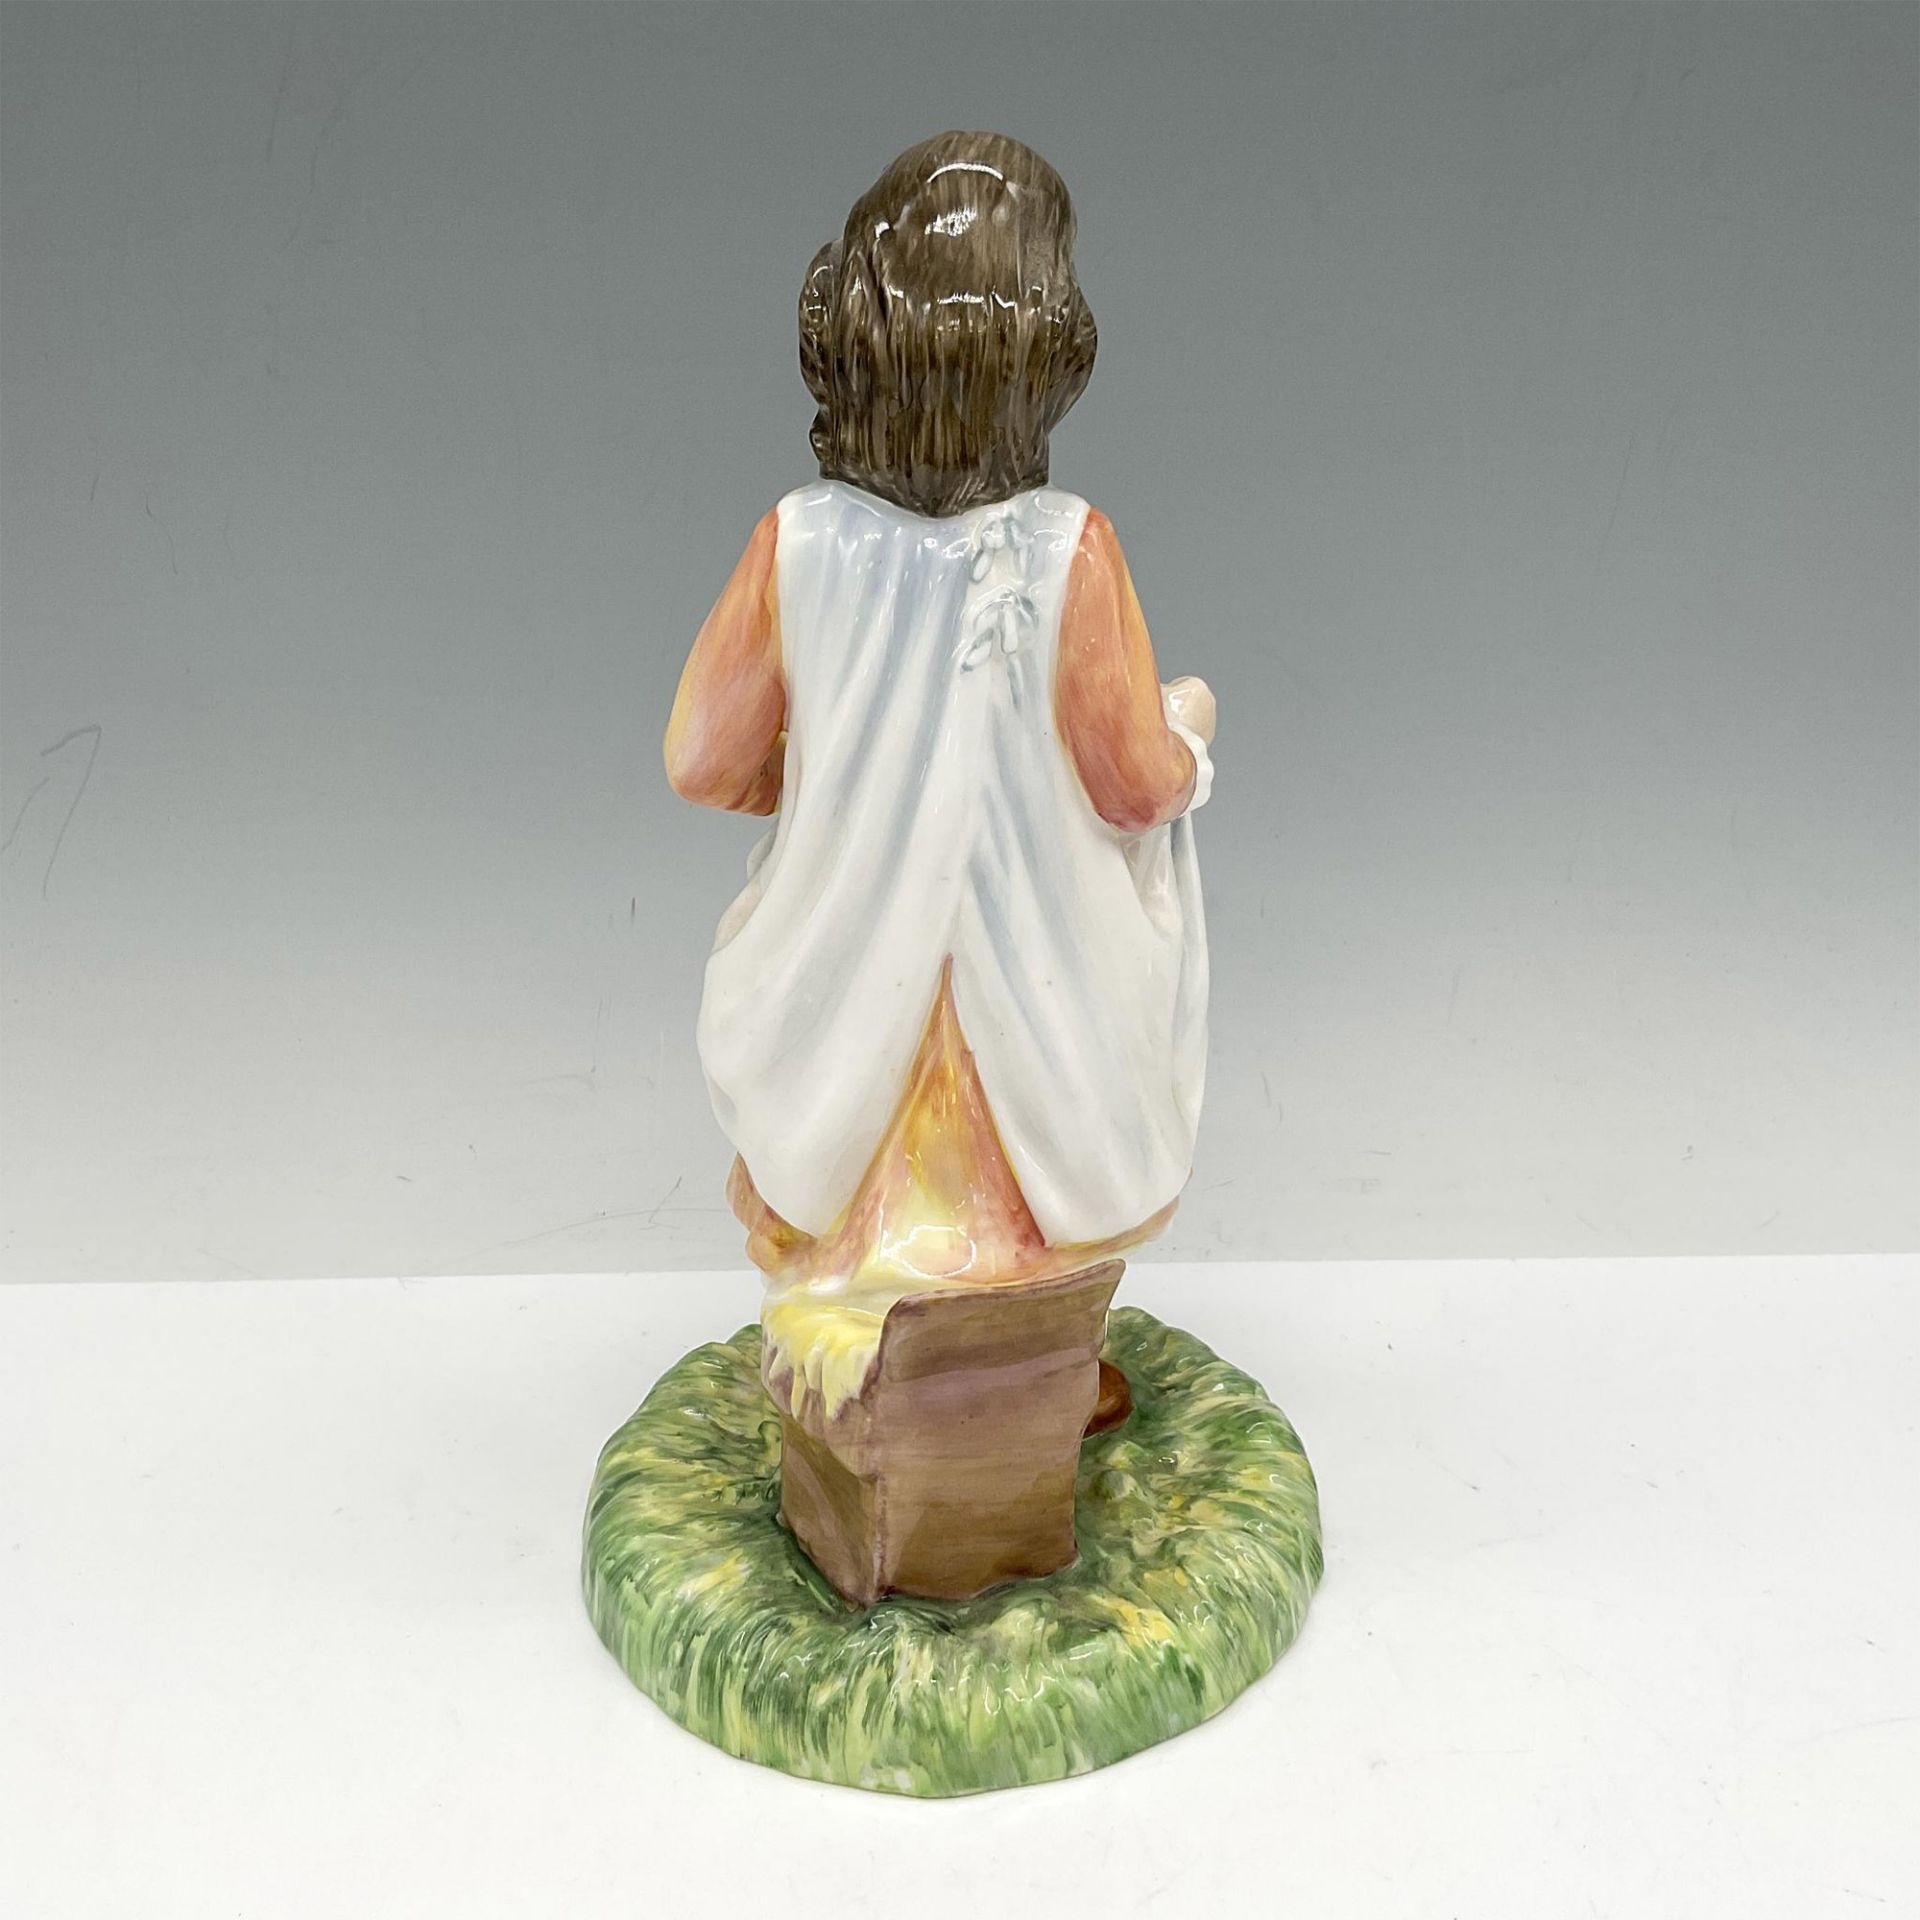 First Outing - HN3377 - Royal Doulton Figurine - Image 2 of 3